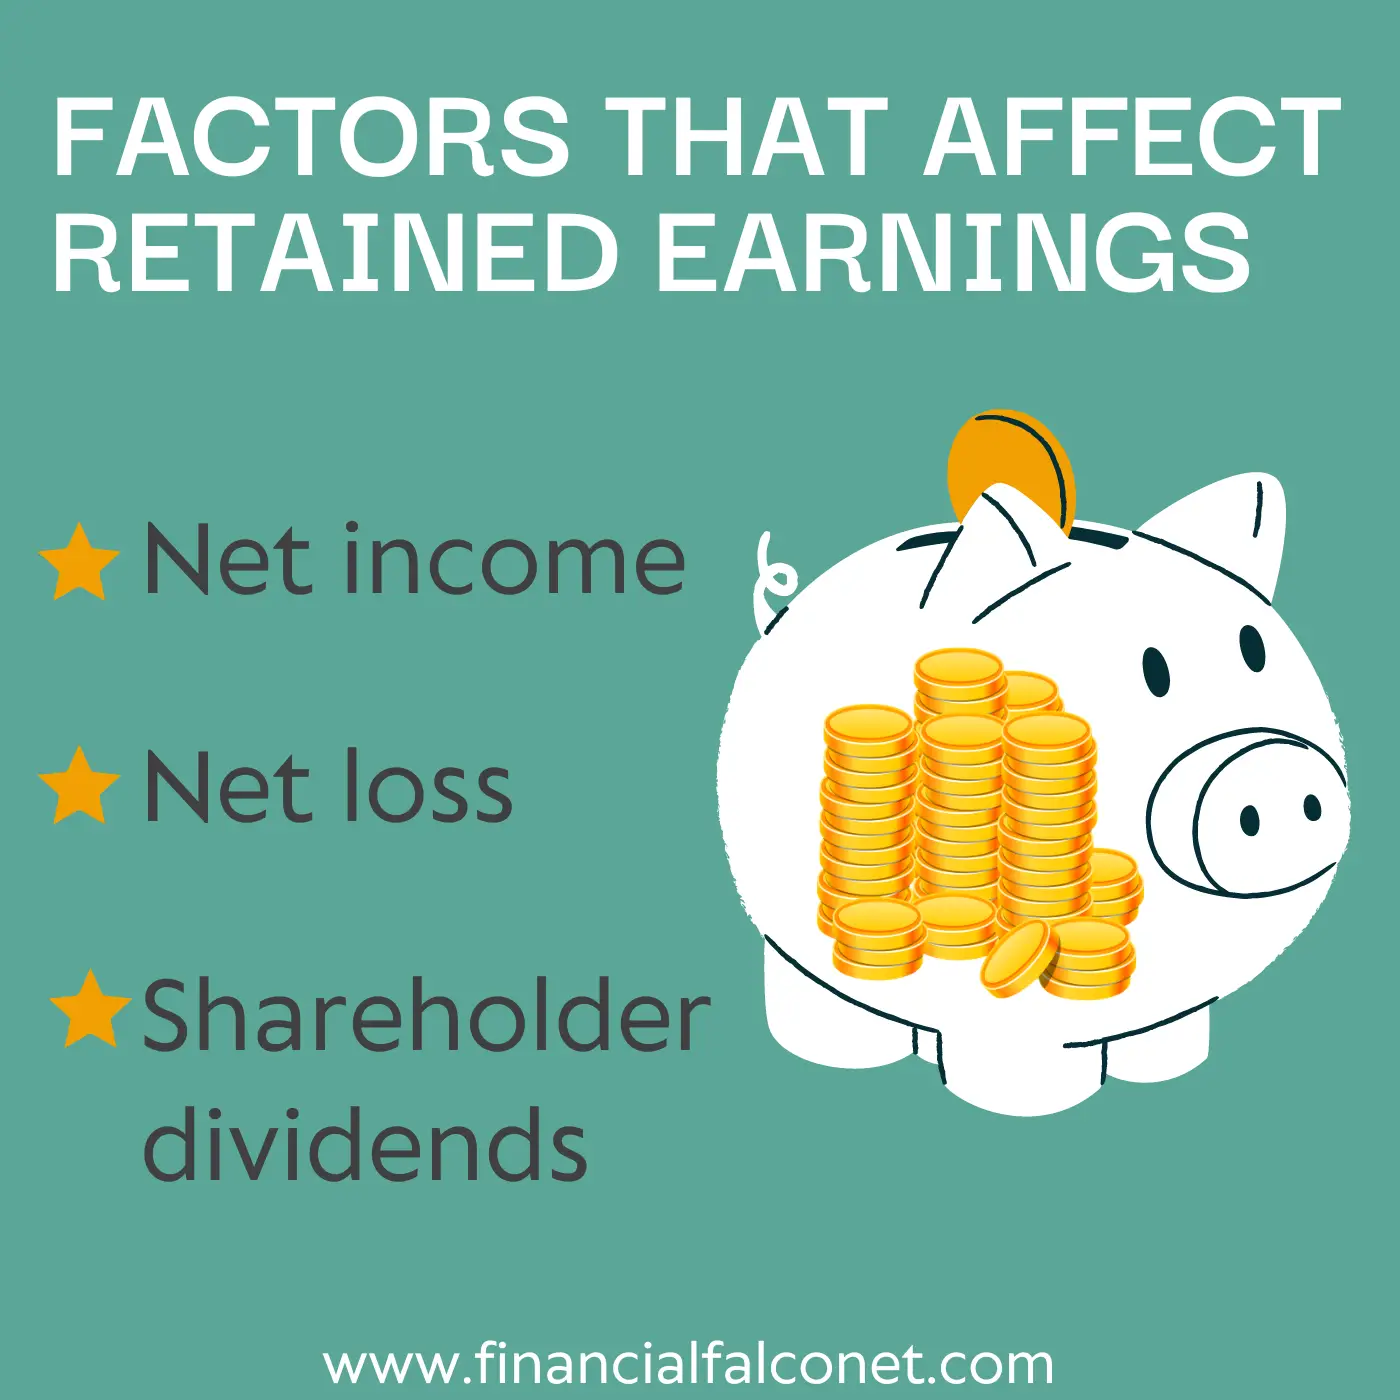 What affects retained earnings?